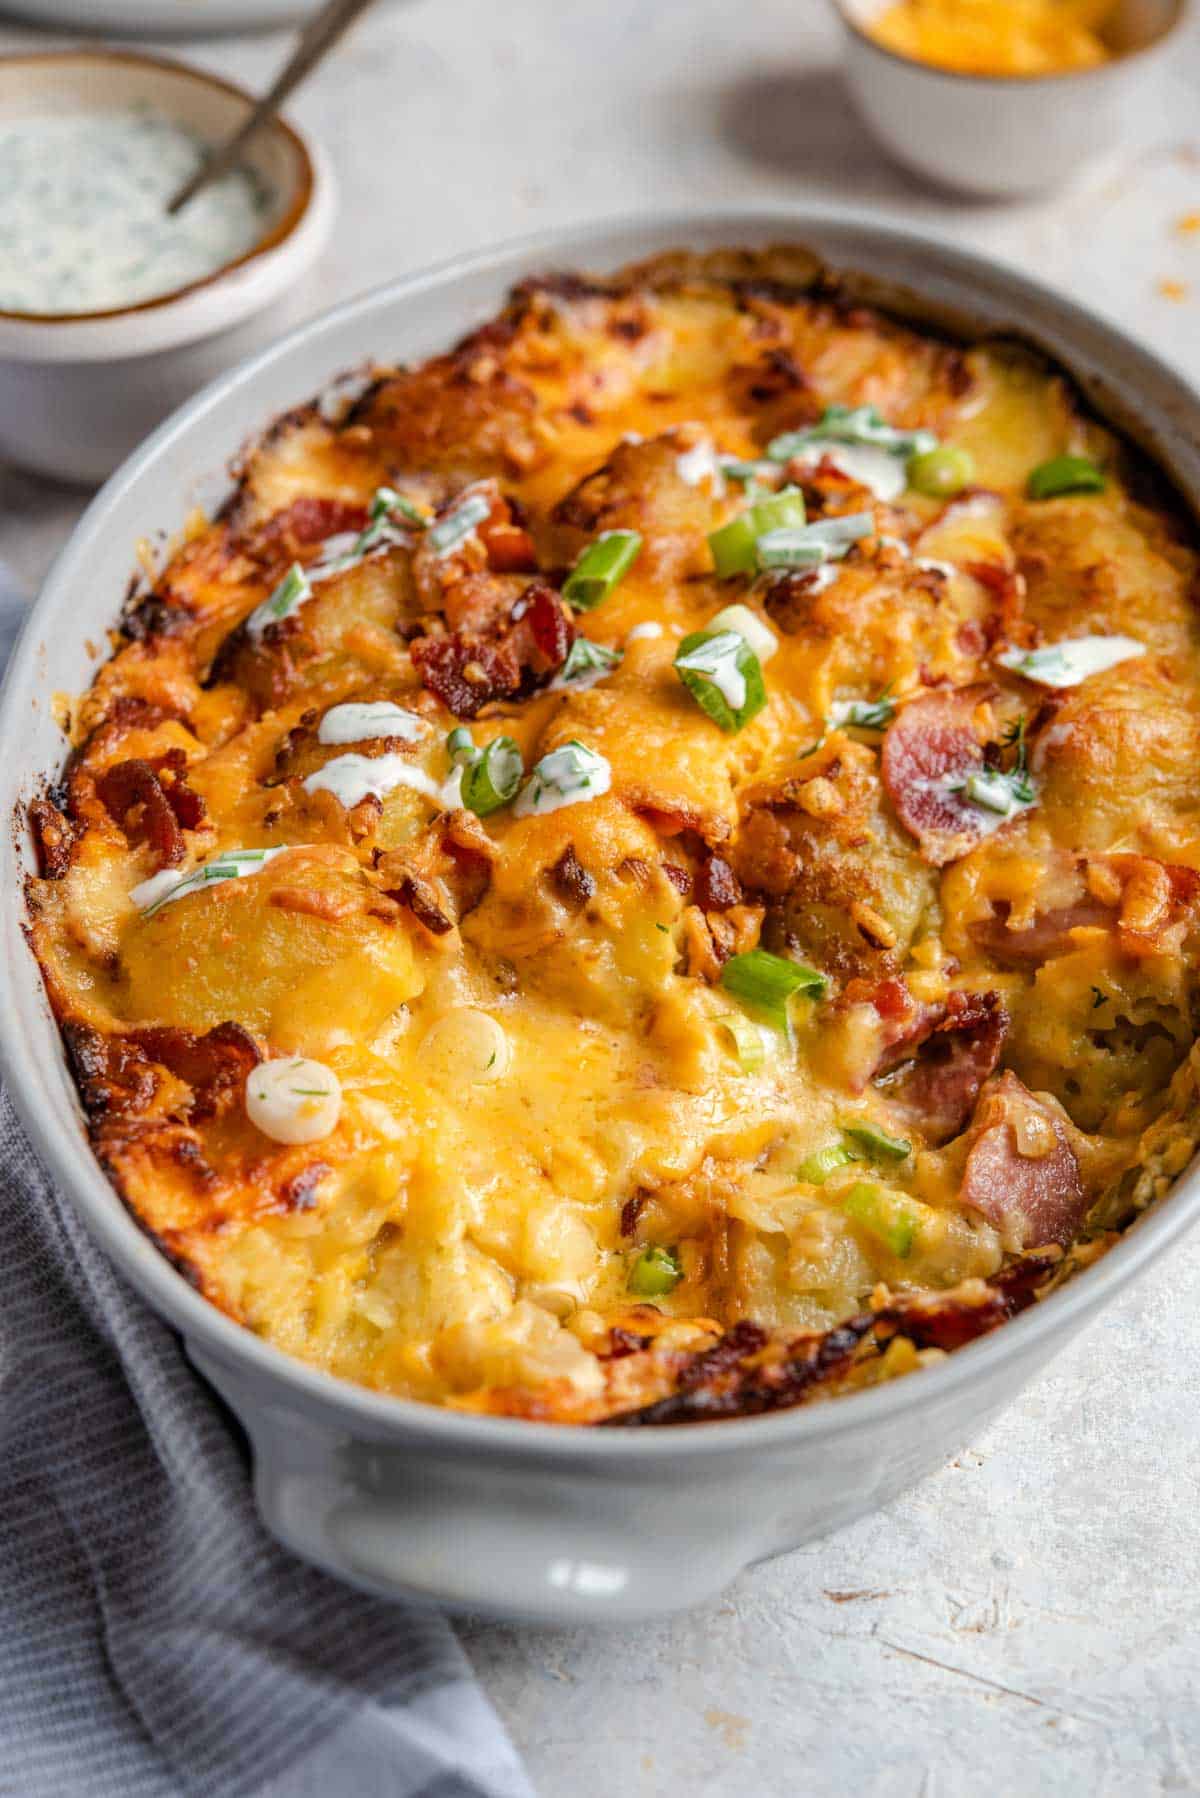 A close up of a cheesy tater tot casserole in a baking dish